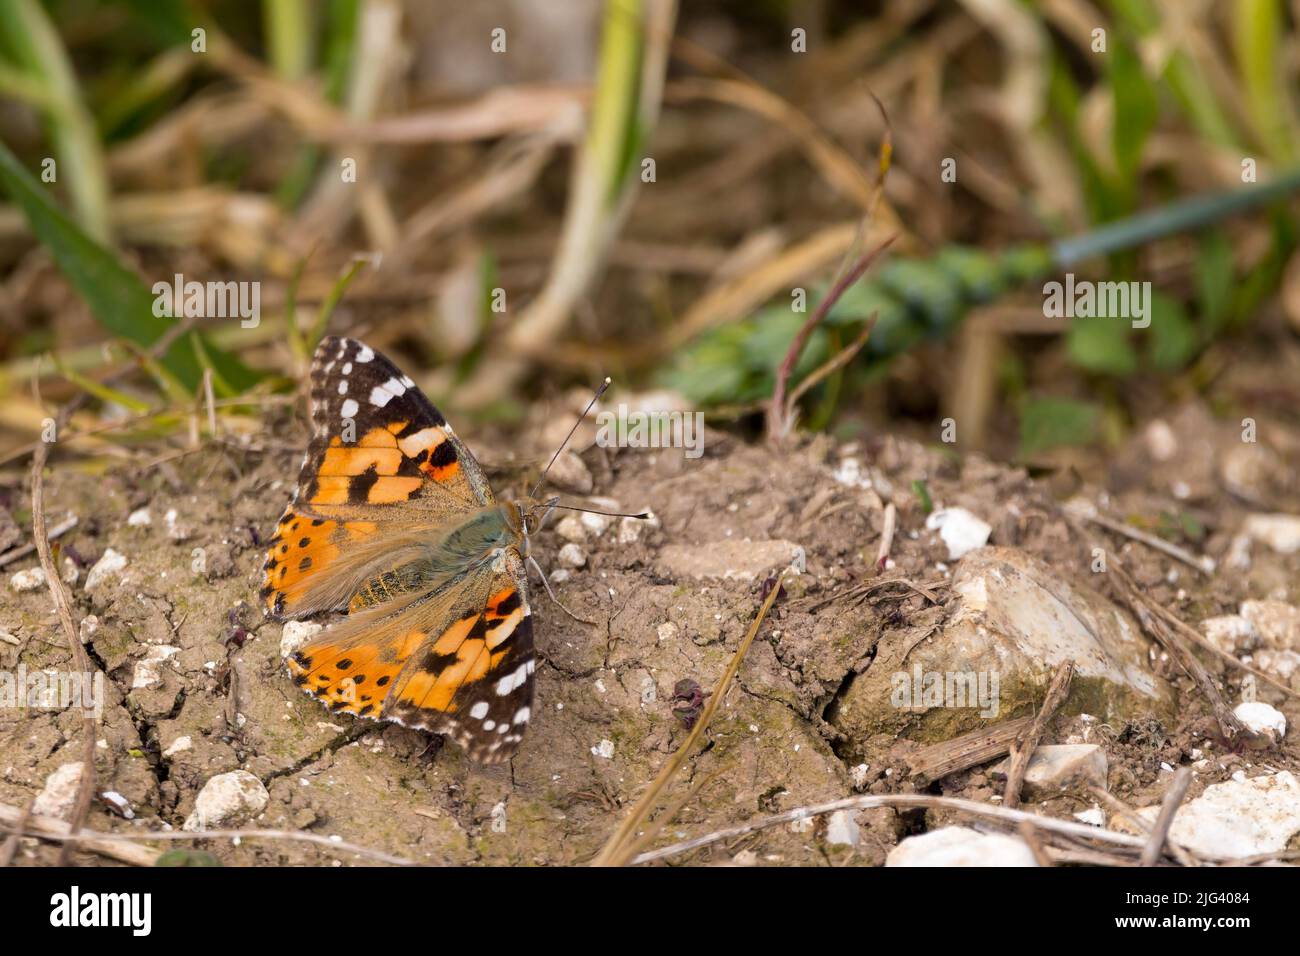 Painted lady butterfly on soil (vanessa cardui) open upper wings marbled pinkish orange buff white and black, underwings buffish patterns as above Stock Photo